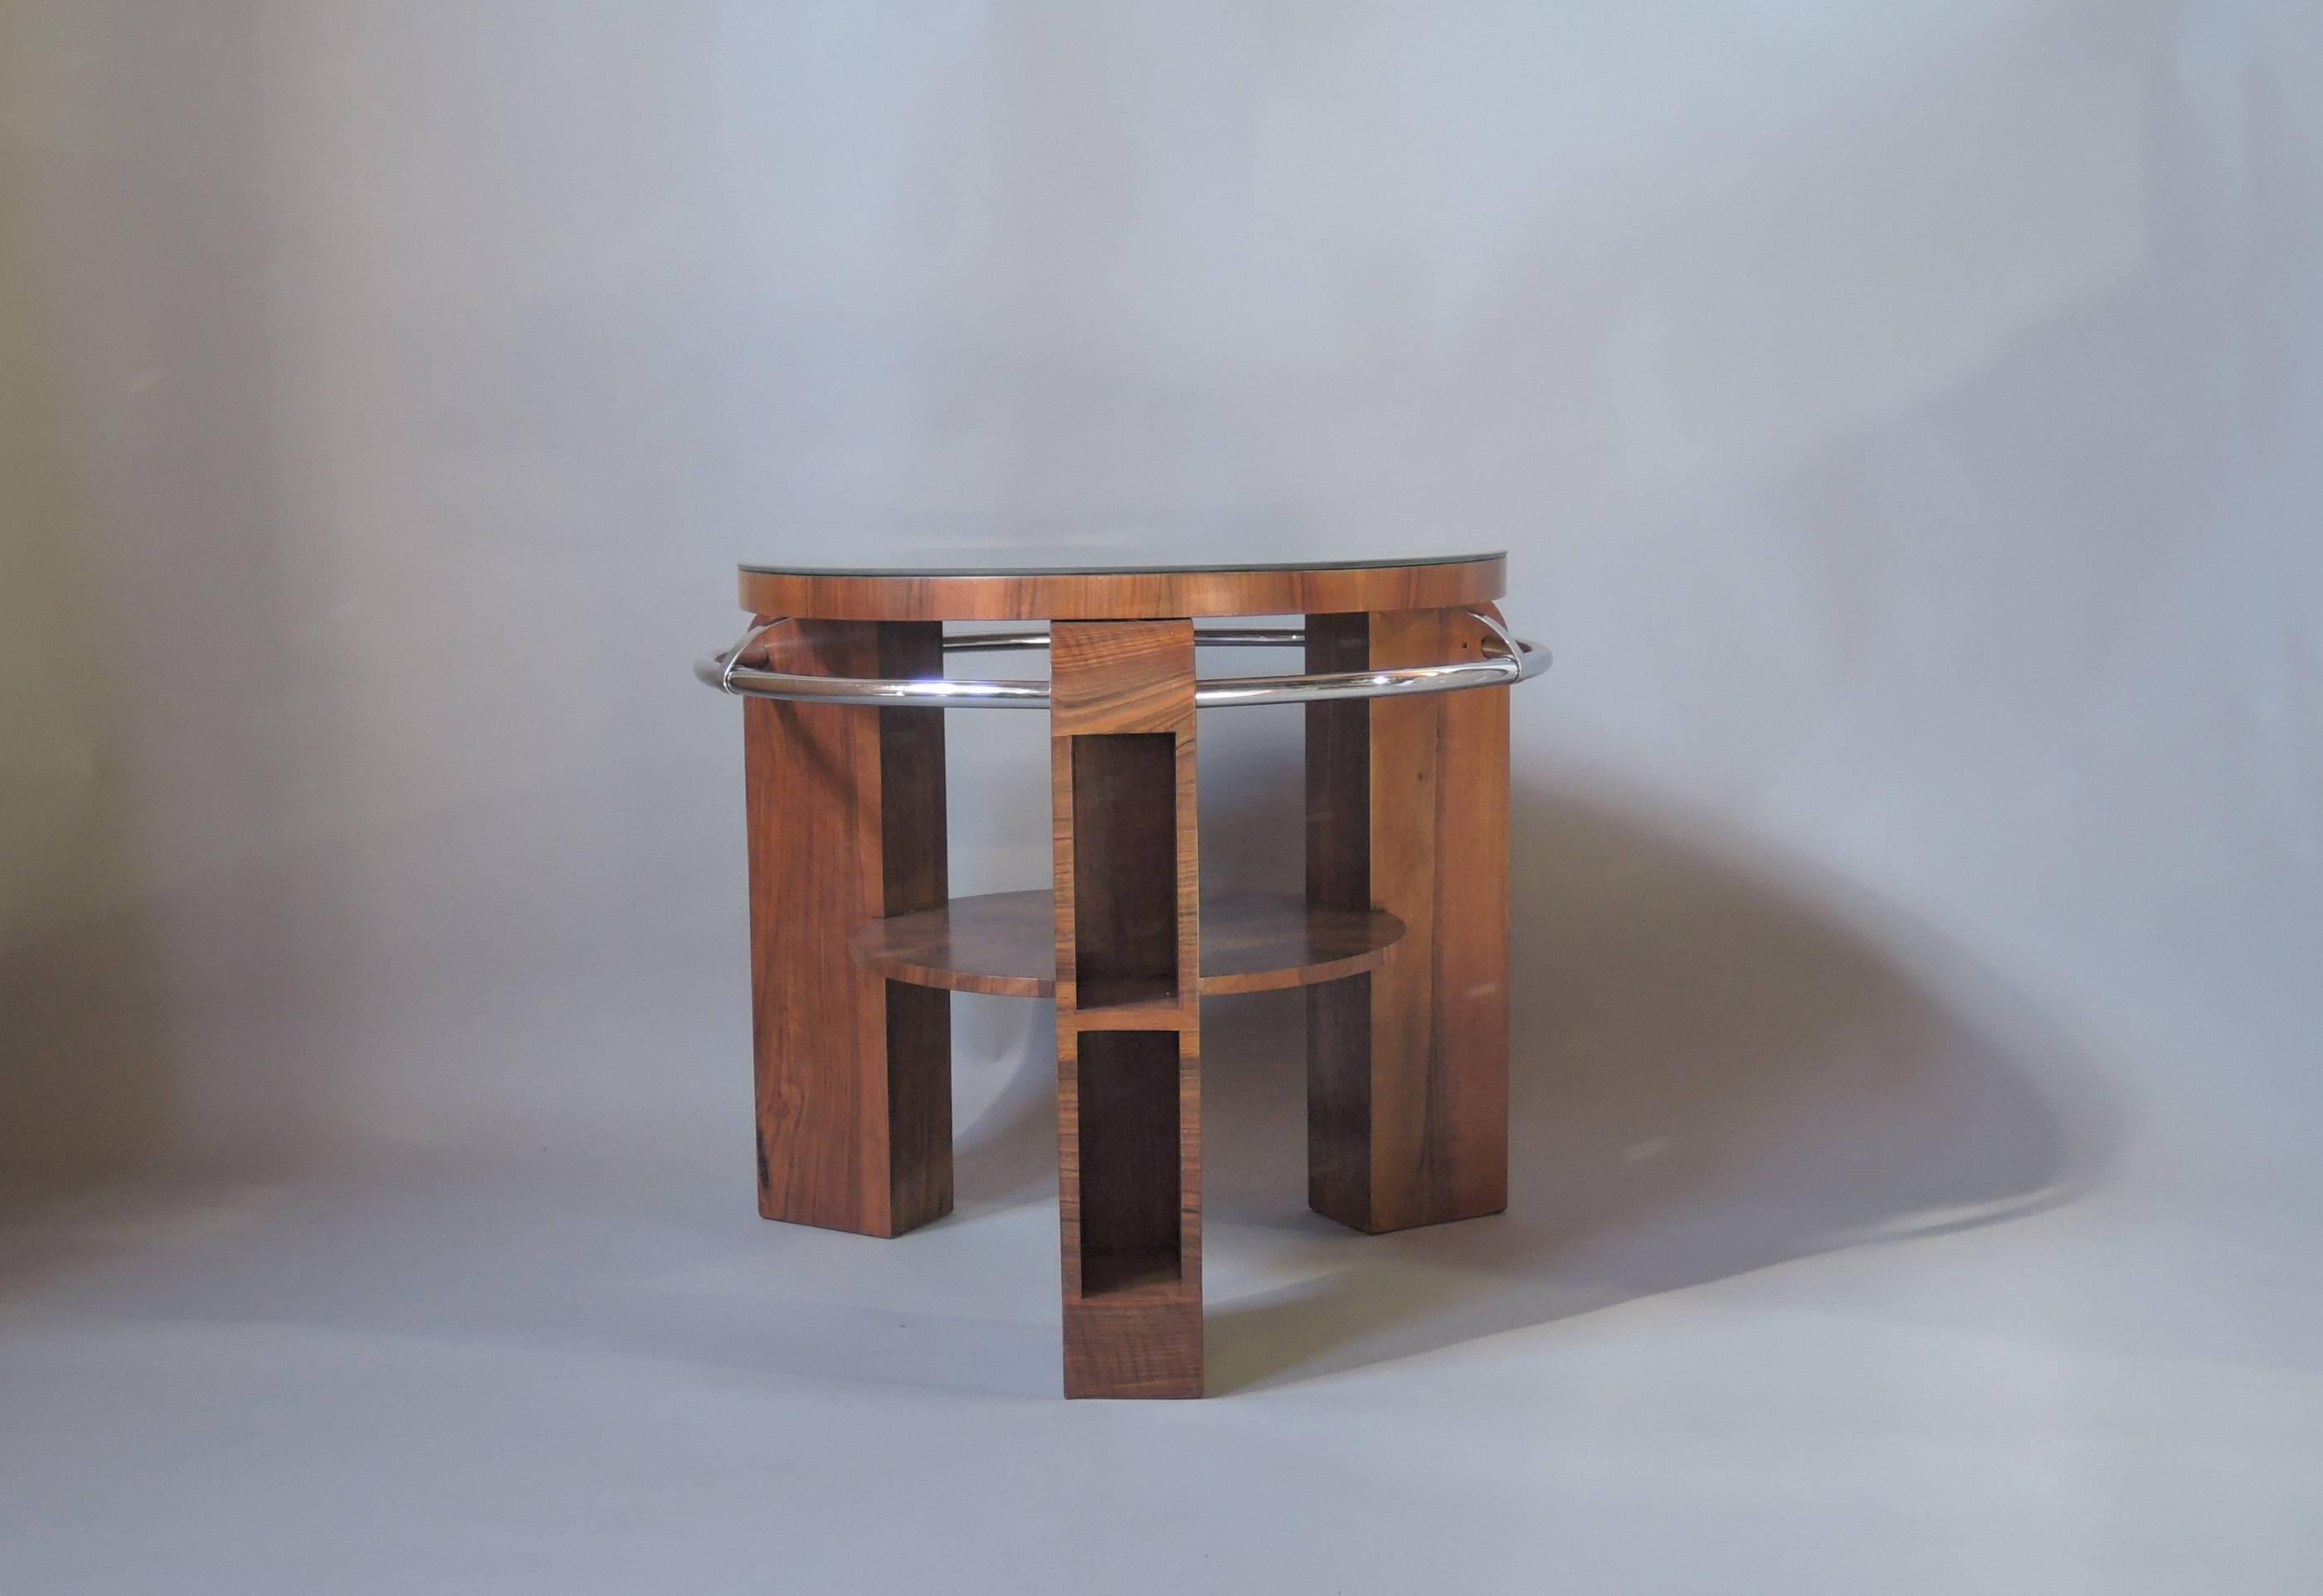 A fine French Art Deco two-tiered walnut gueridon supported by three legs with niches linked by a chromed circular tube. Beveled mirrored top (27 1/5